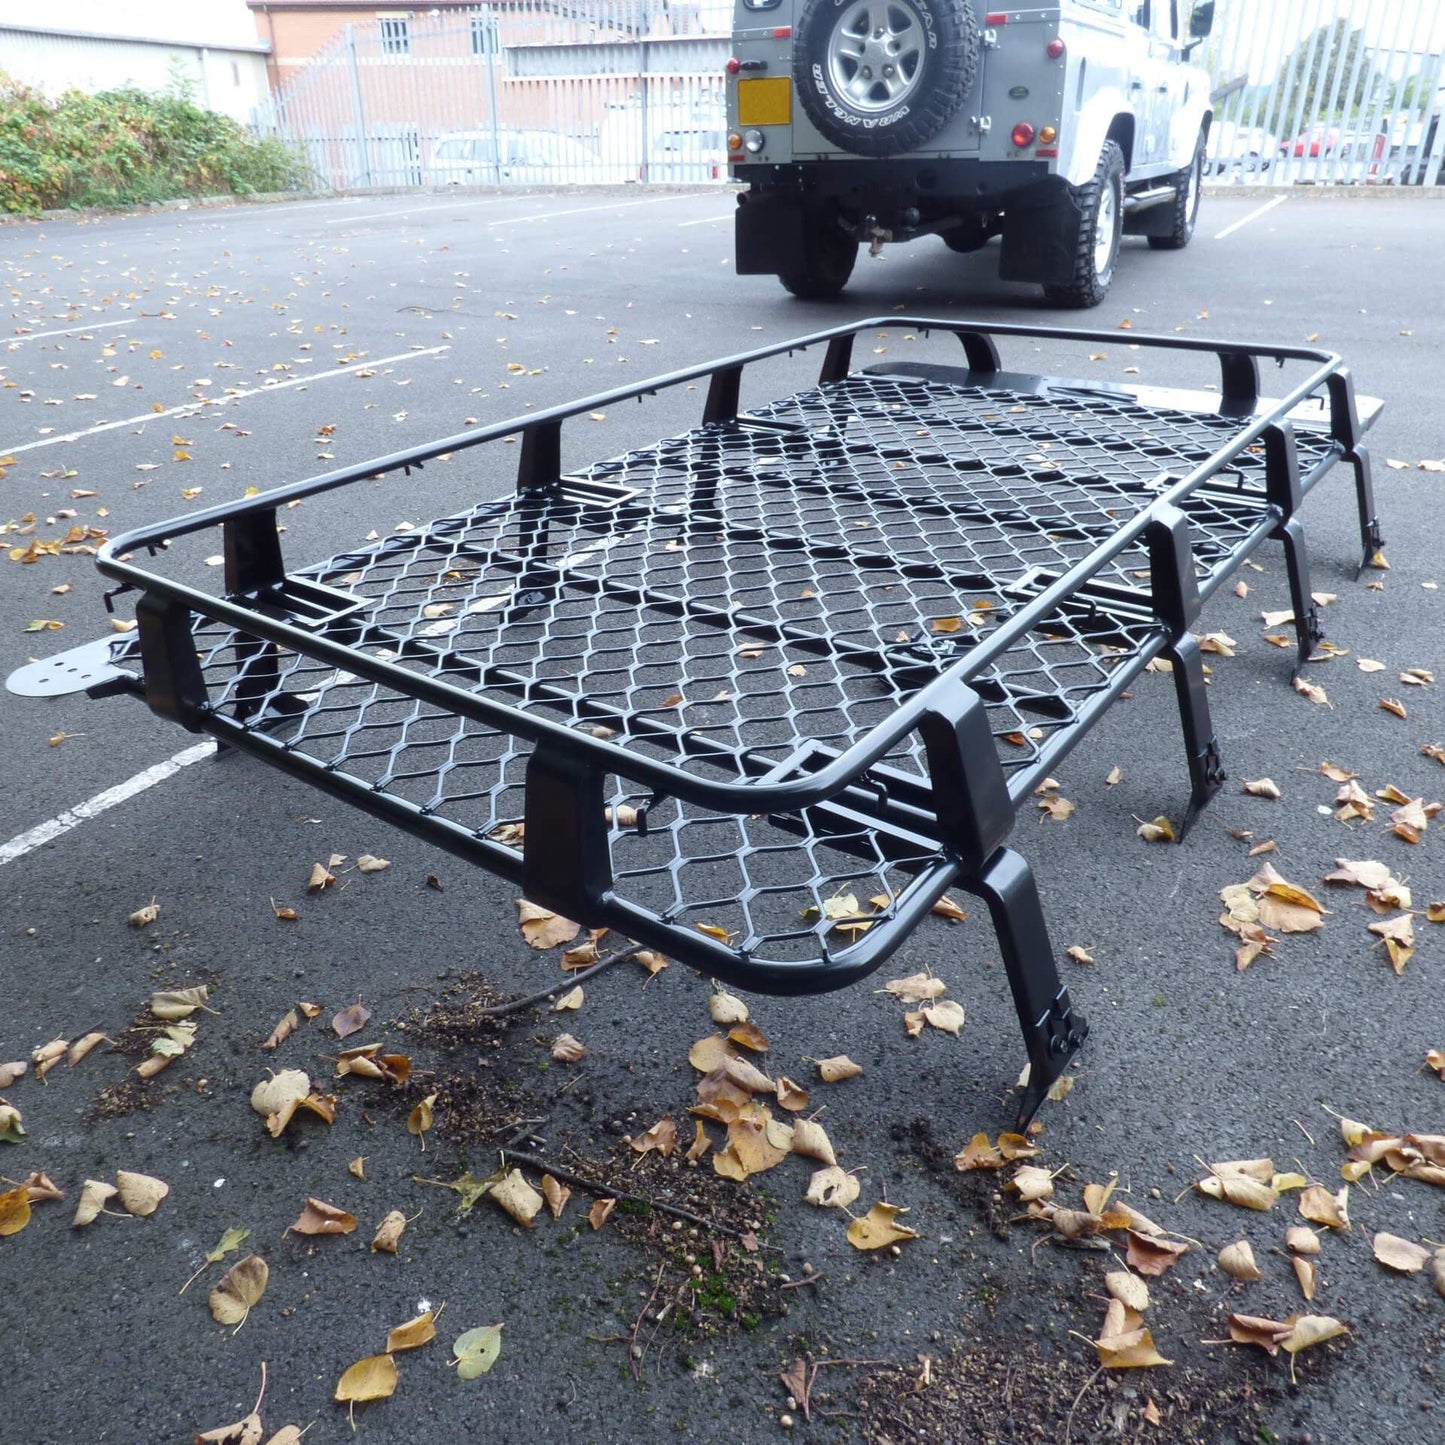 Expedition Aluminium Full Basket Roof Rack for Land Rover Discovery 1 and 2